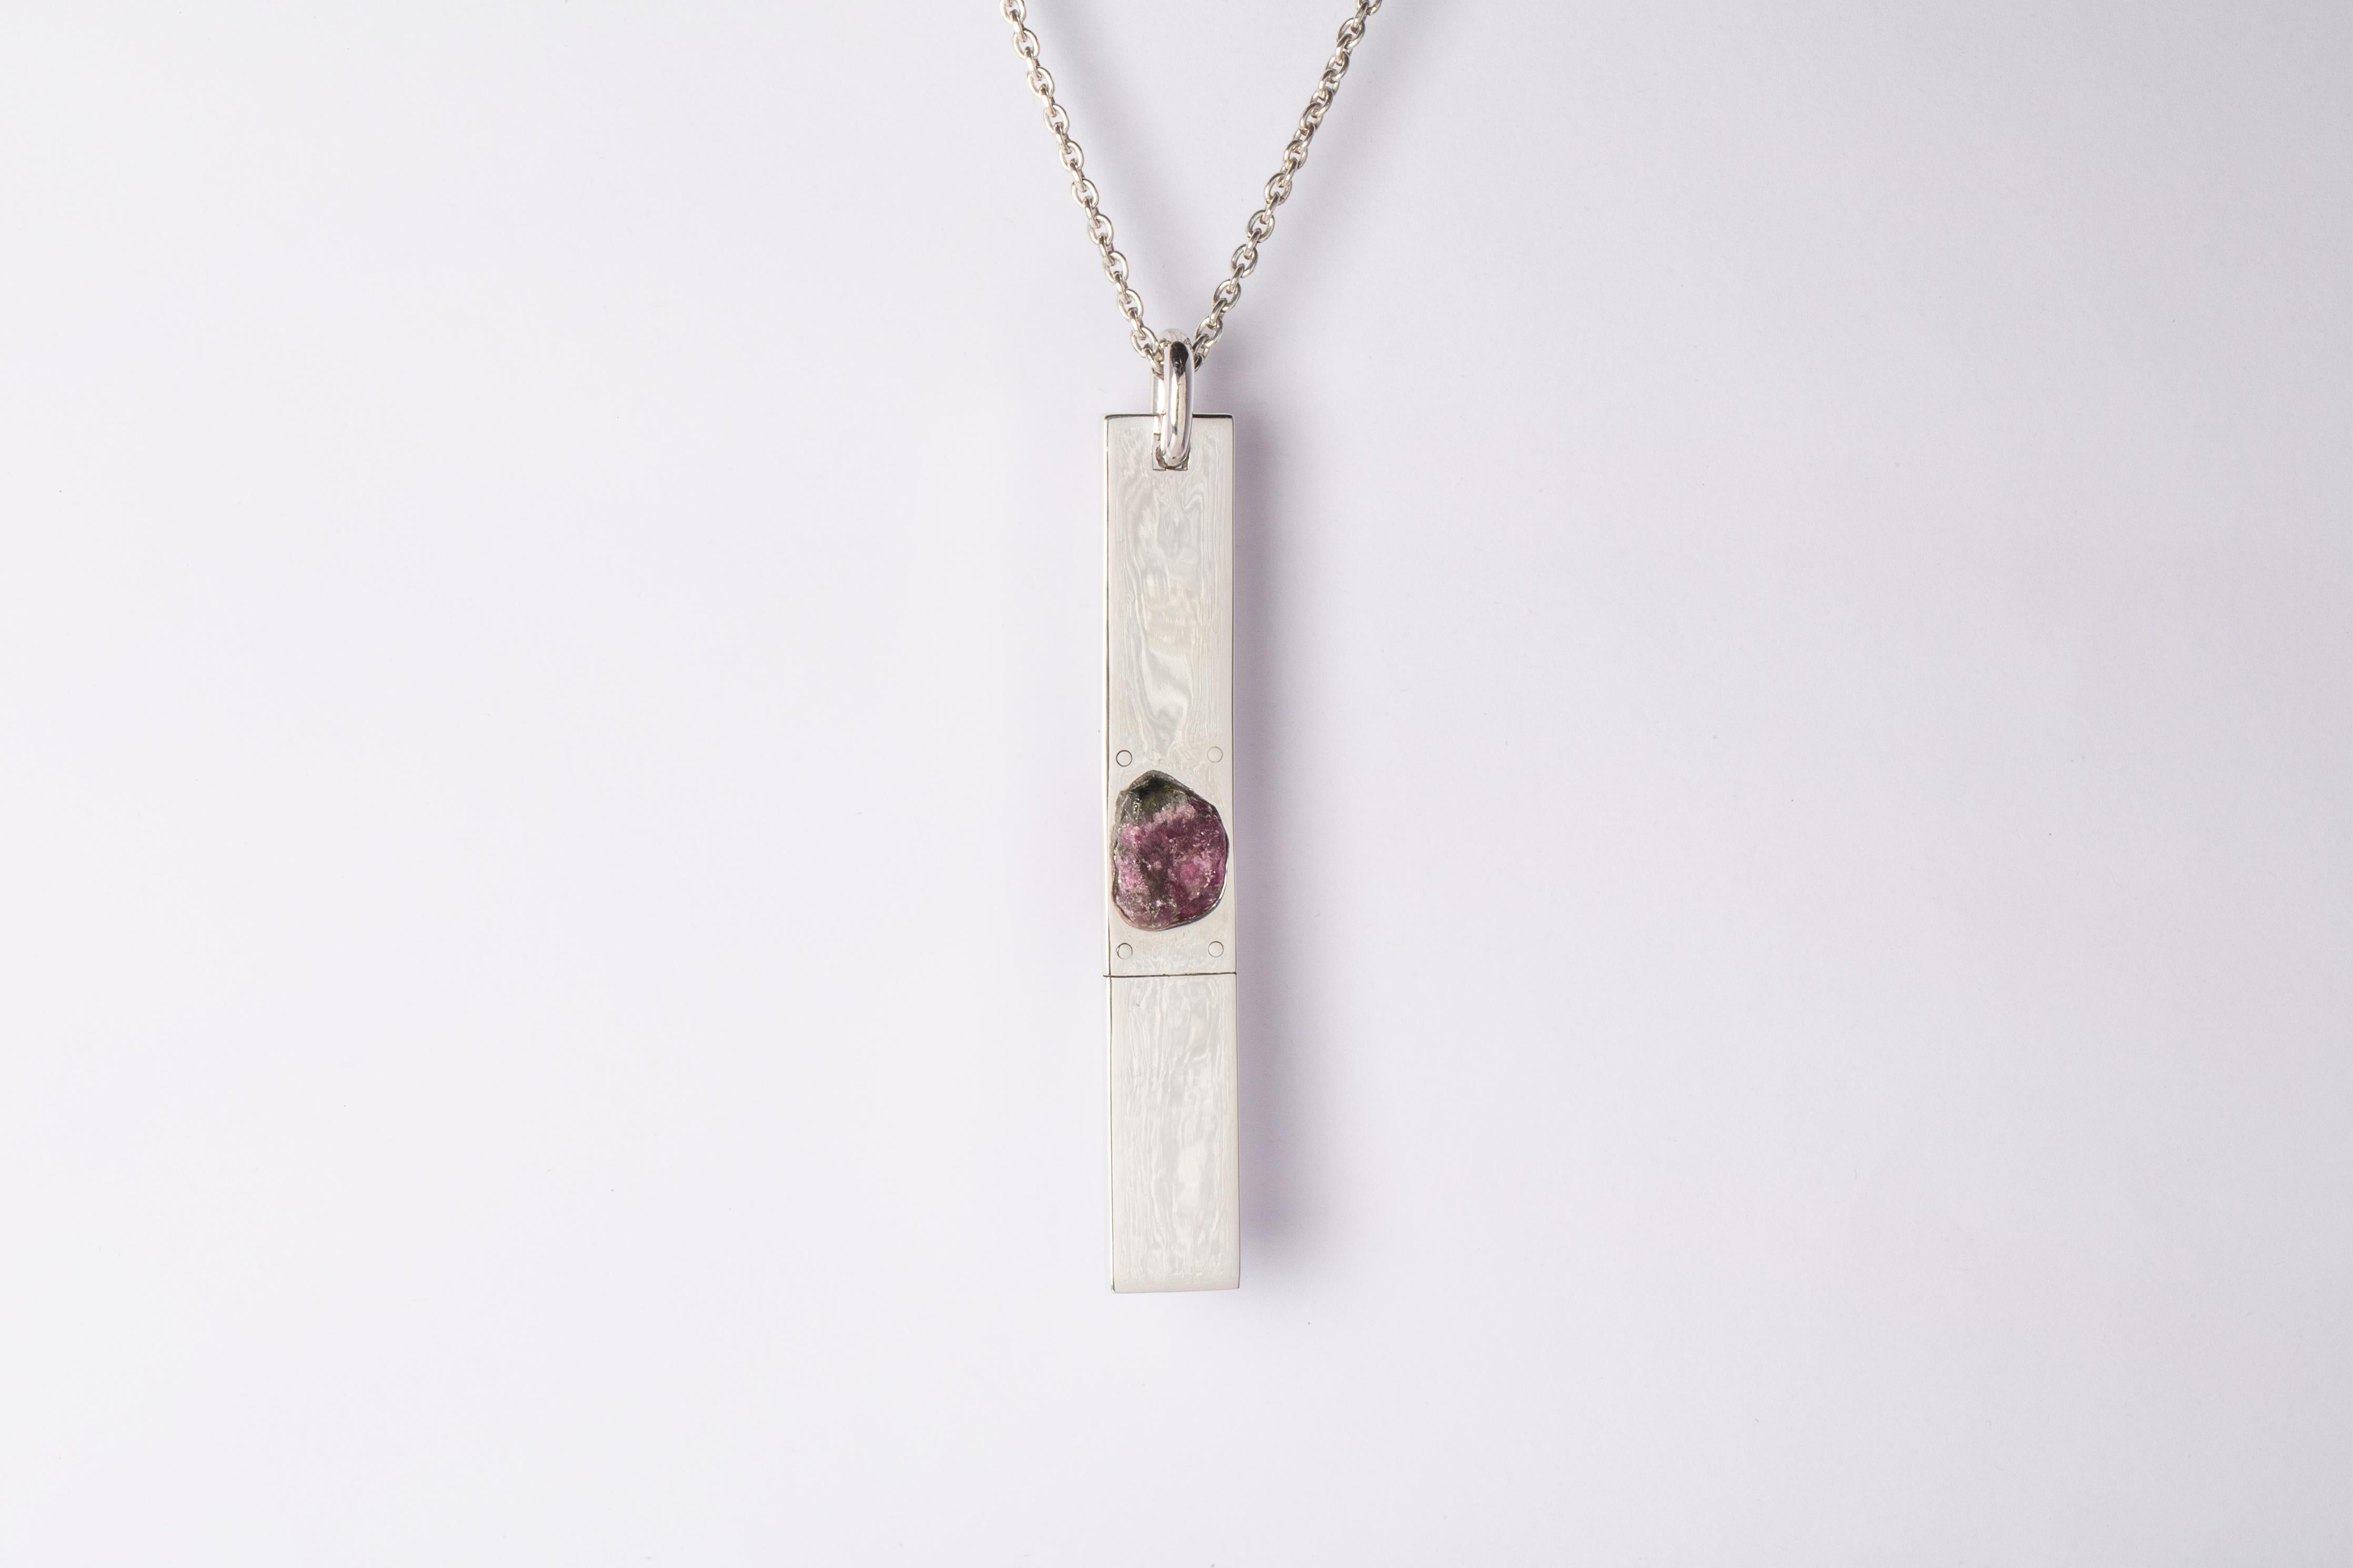 Necklace made in polished sterling silver and a rough of elbaite, a green-pink tourmaline color. The Amulet series seeks to encapsulate the energy of a mineral element(s). This family is a branch from the Talisman family and seeks to further explore